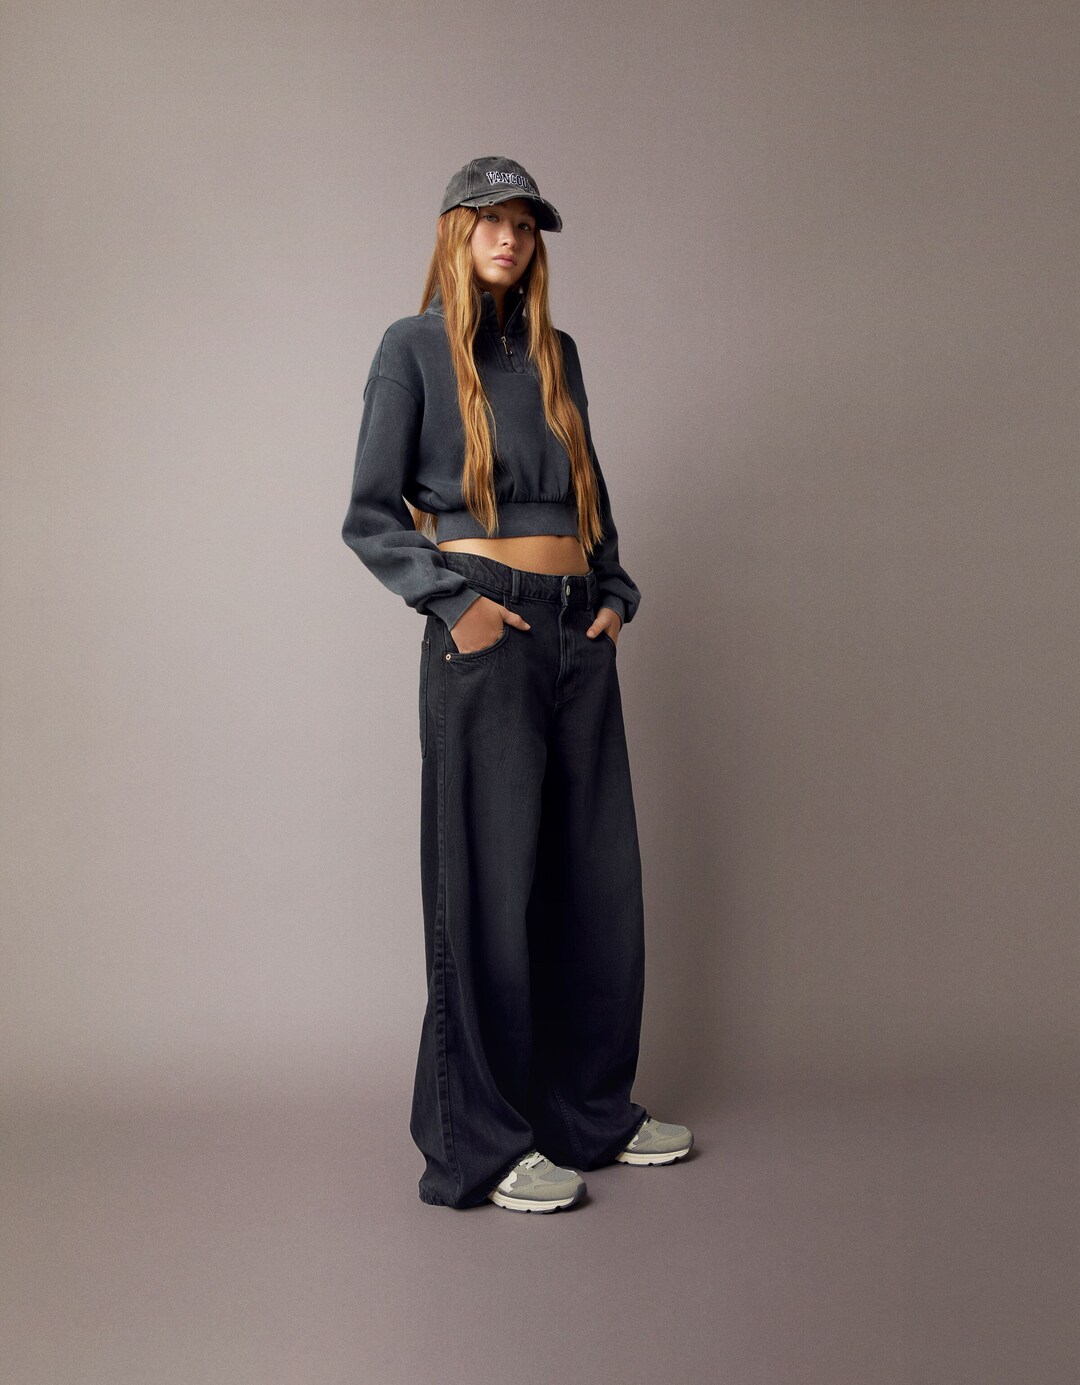 Wide twill skater trousers